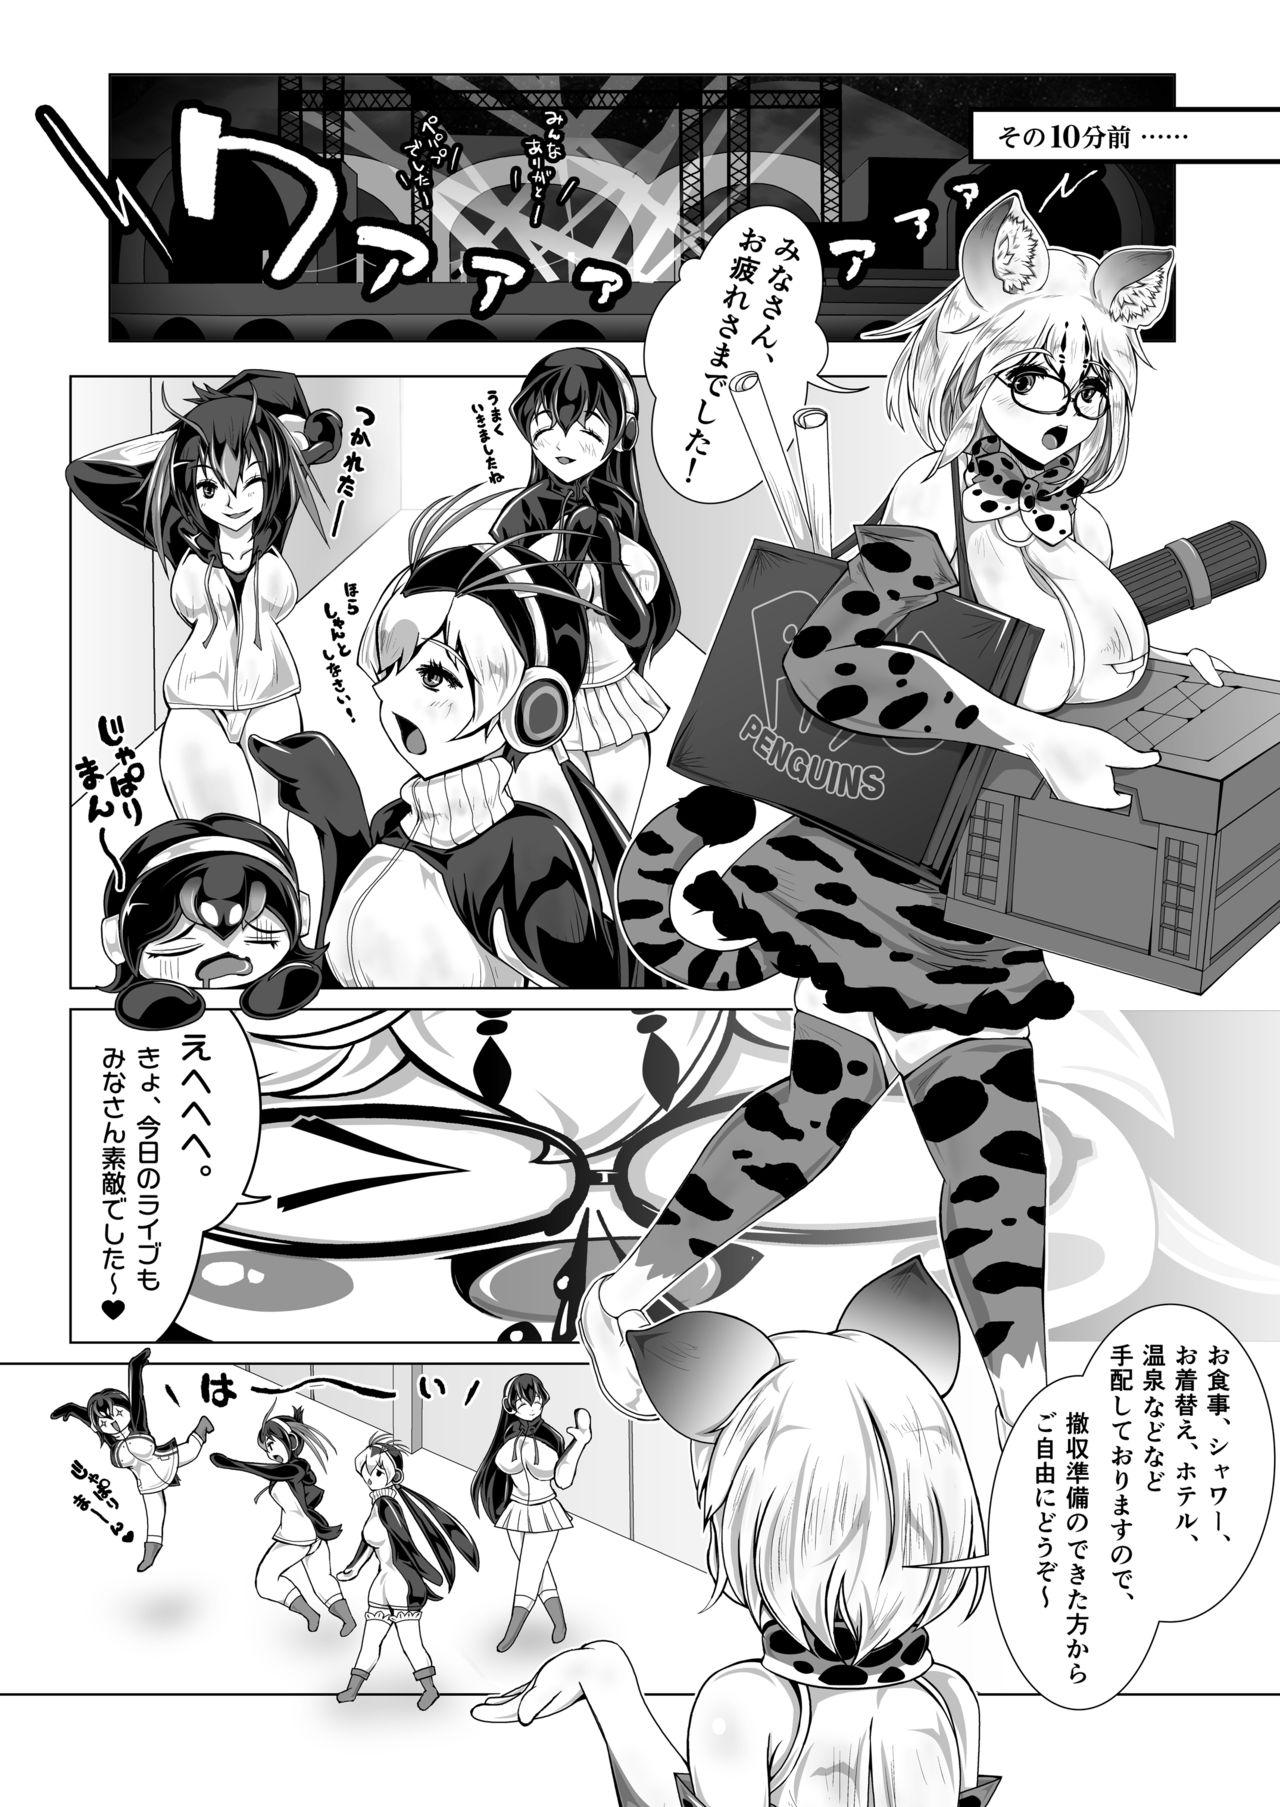 Amadora Margay no PPP Management - Kemono friends Hair - Page 4